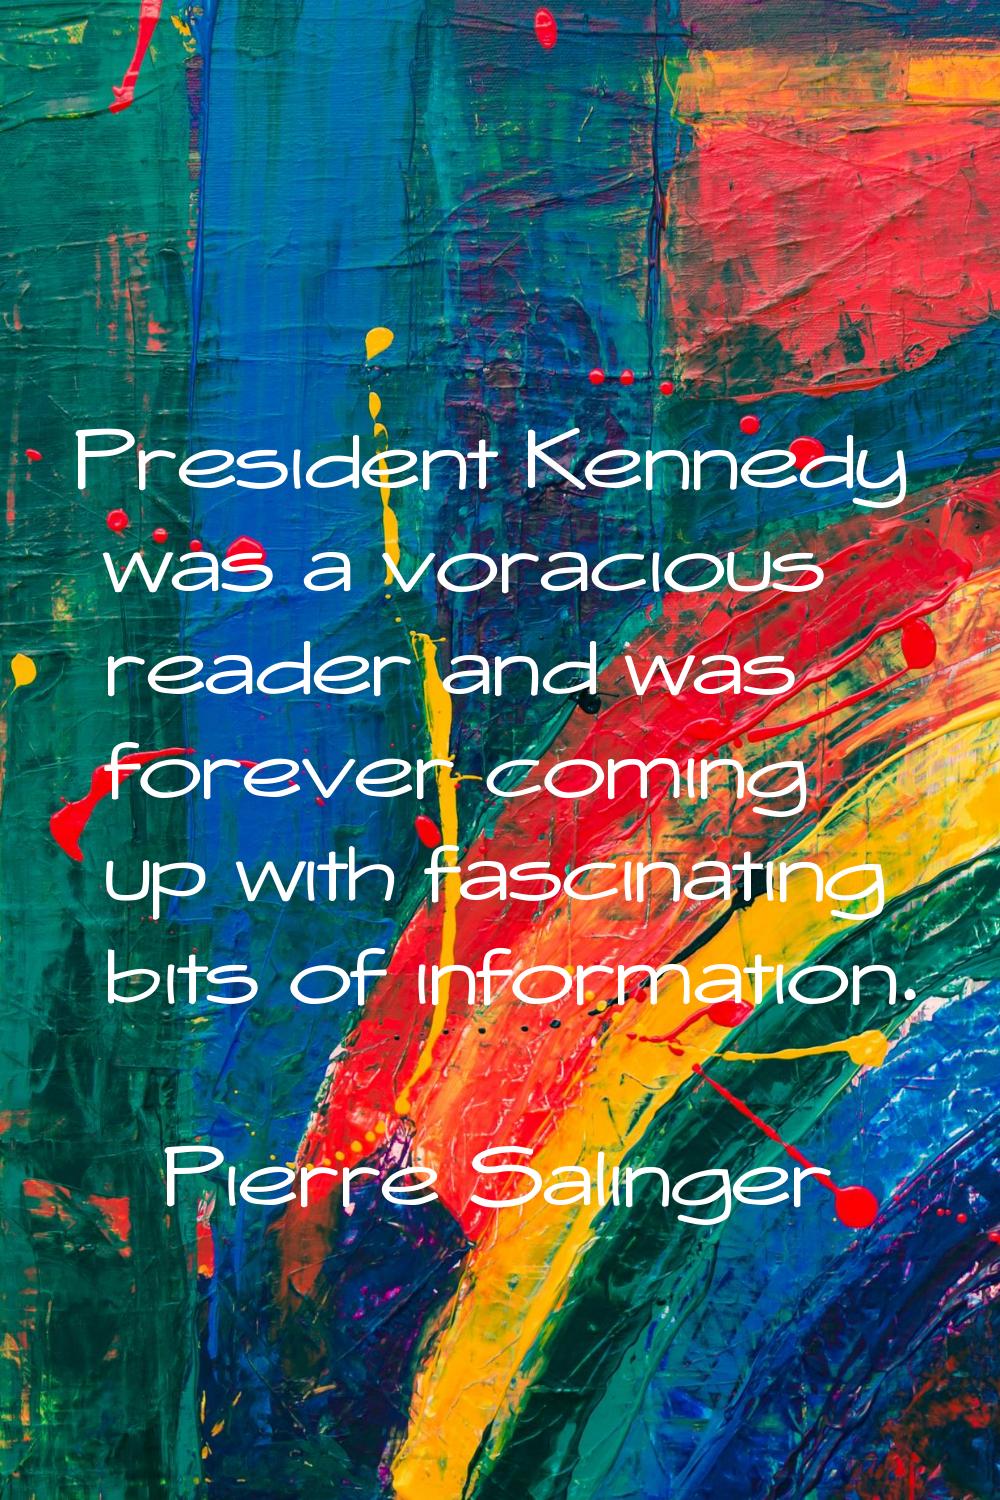 President Kennedy was a voracious reader and was forever coming up with fascinating bits of informa